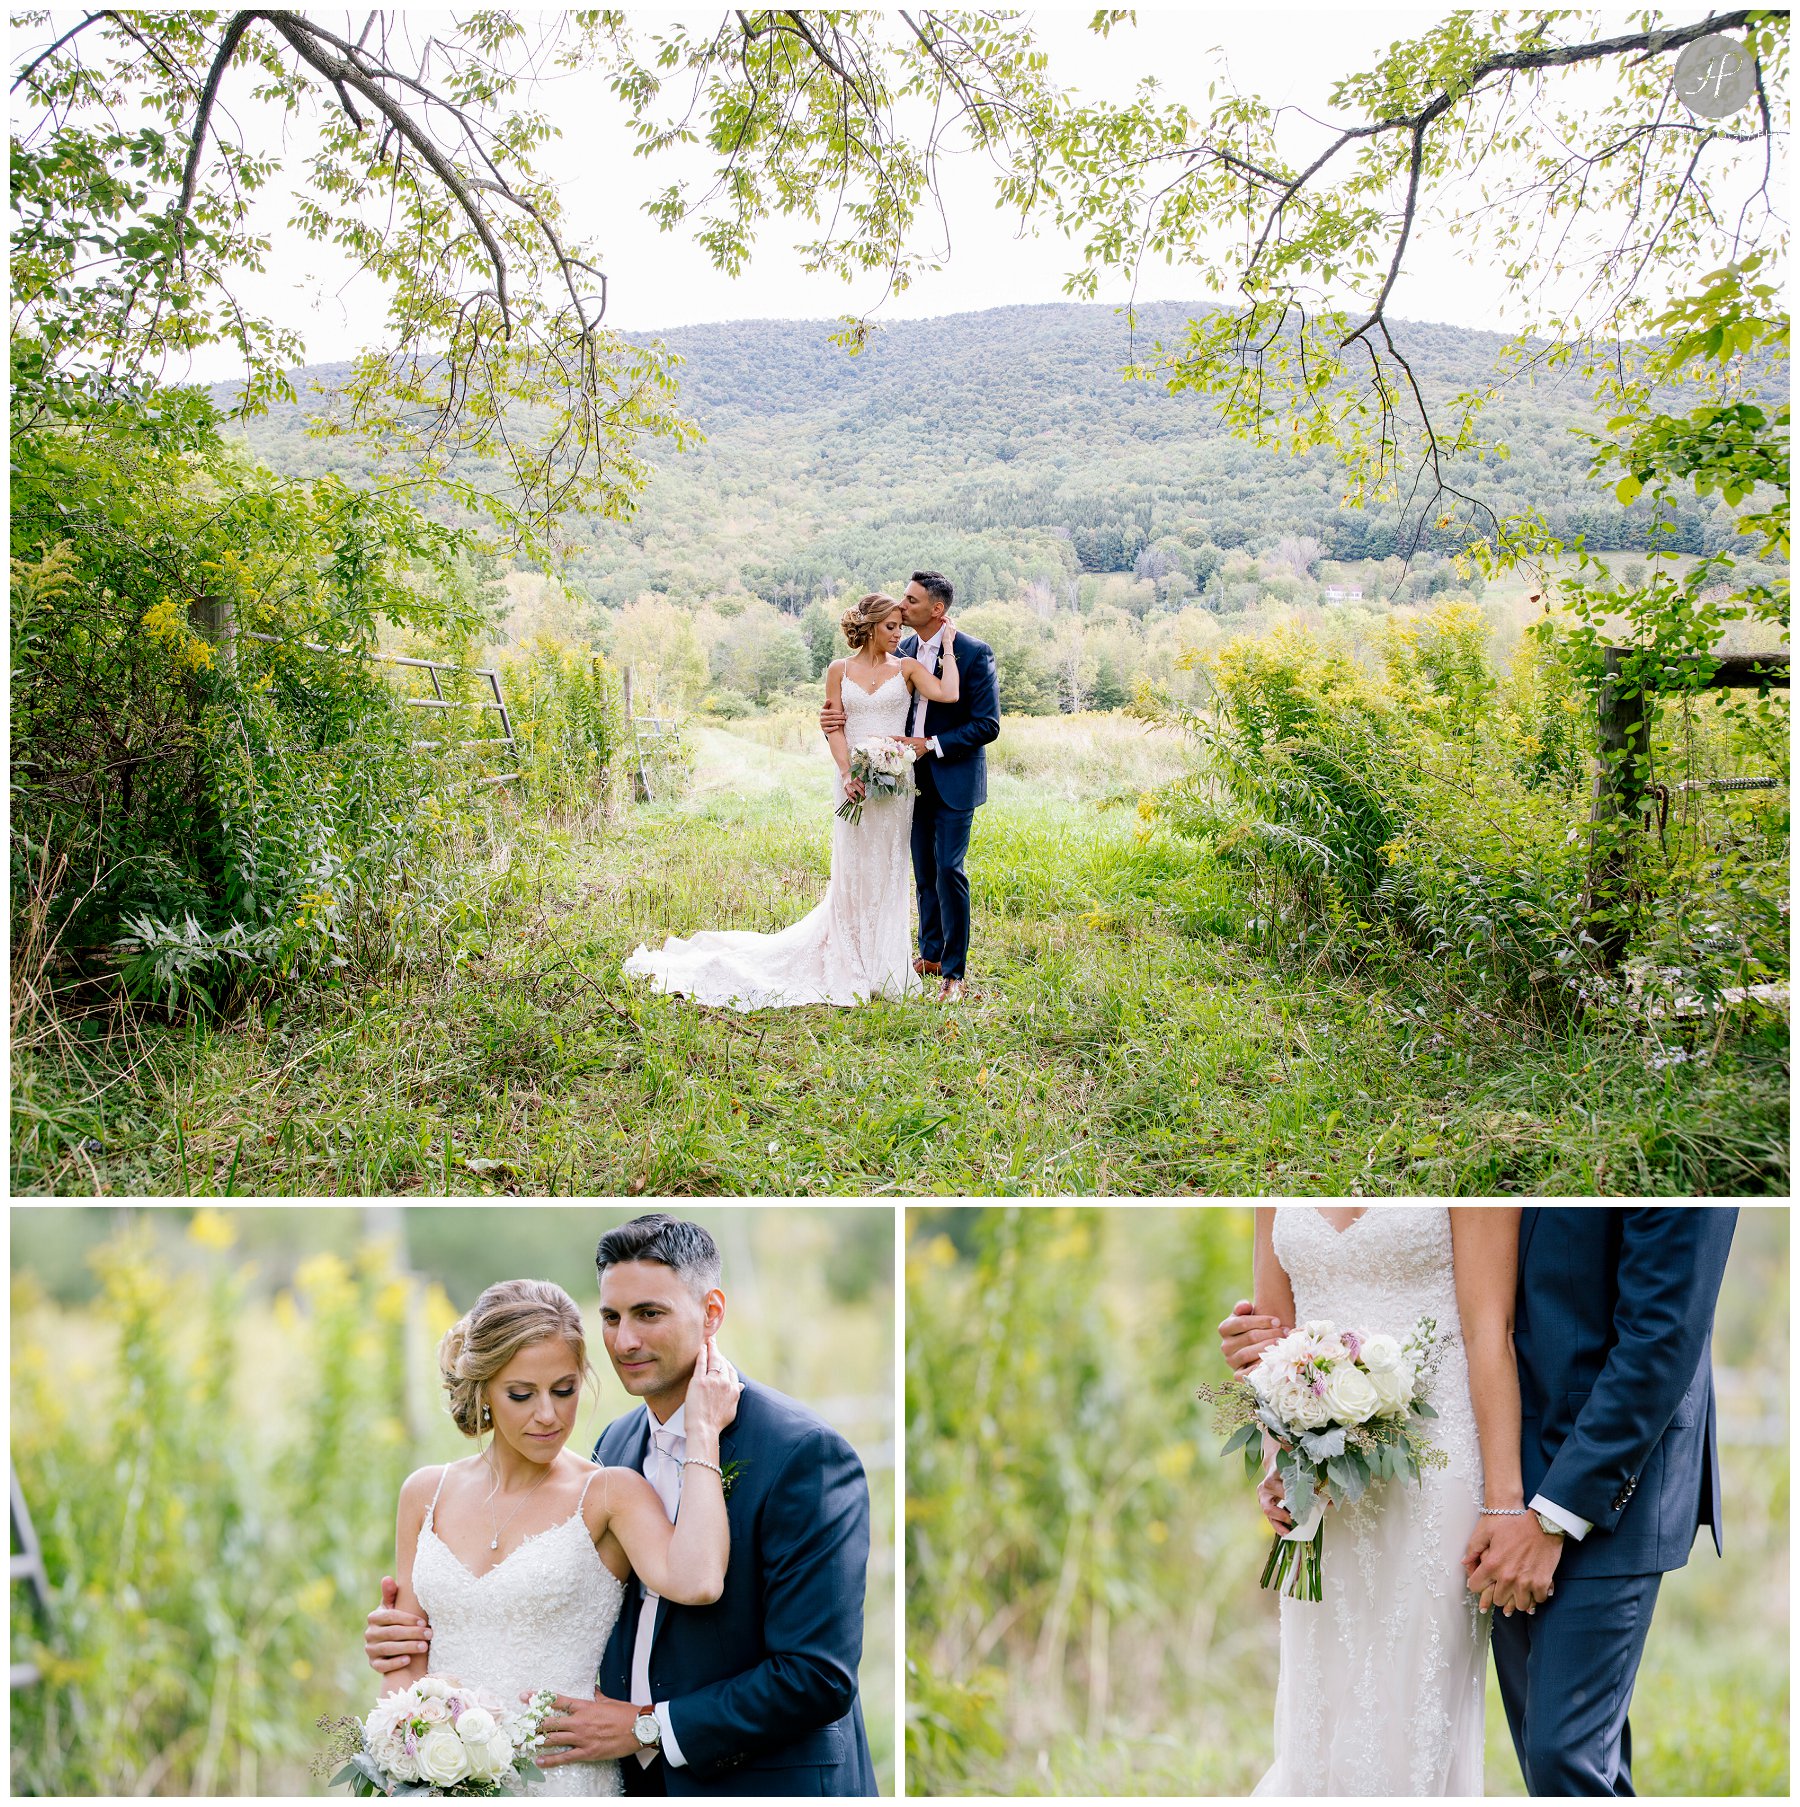 bride and groom in field of tall grass at stone tavern farm wedding in the catskills new york